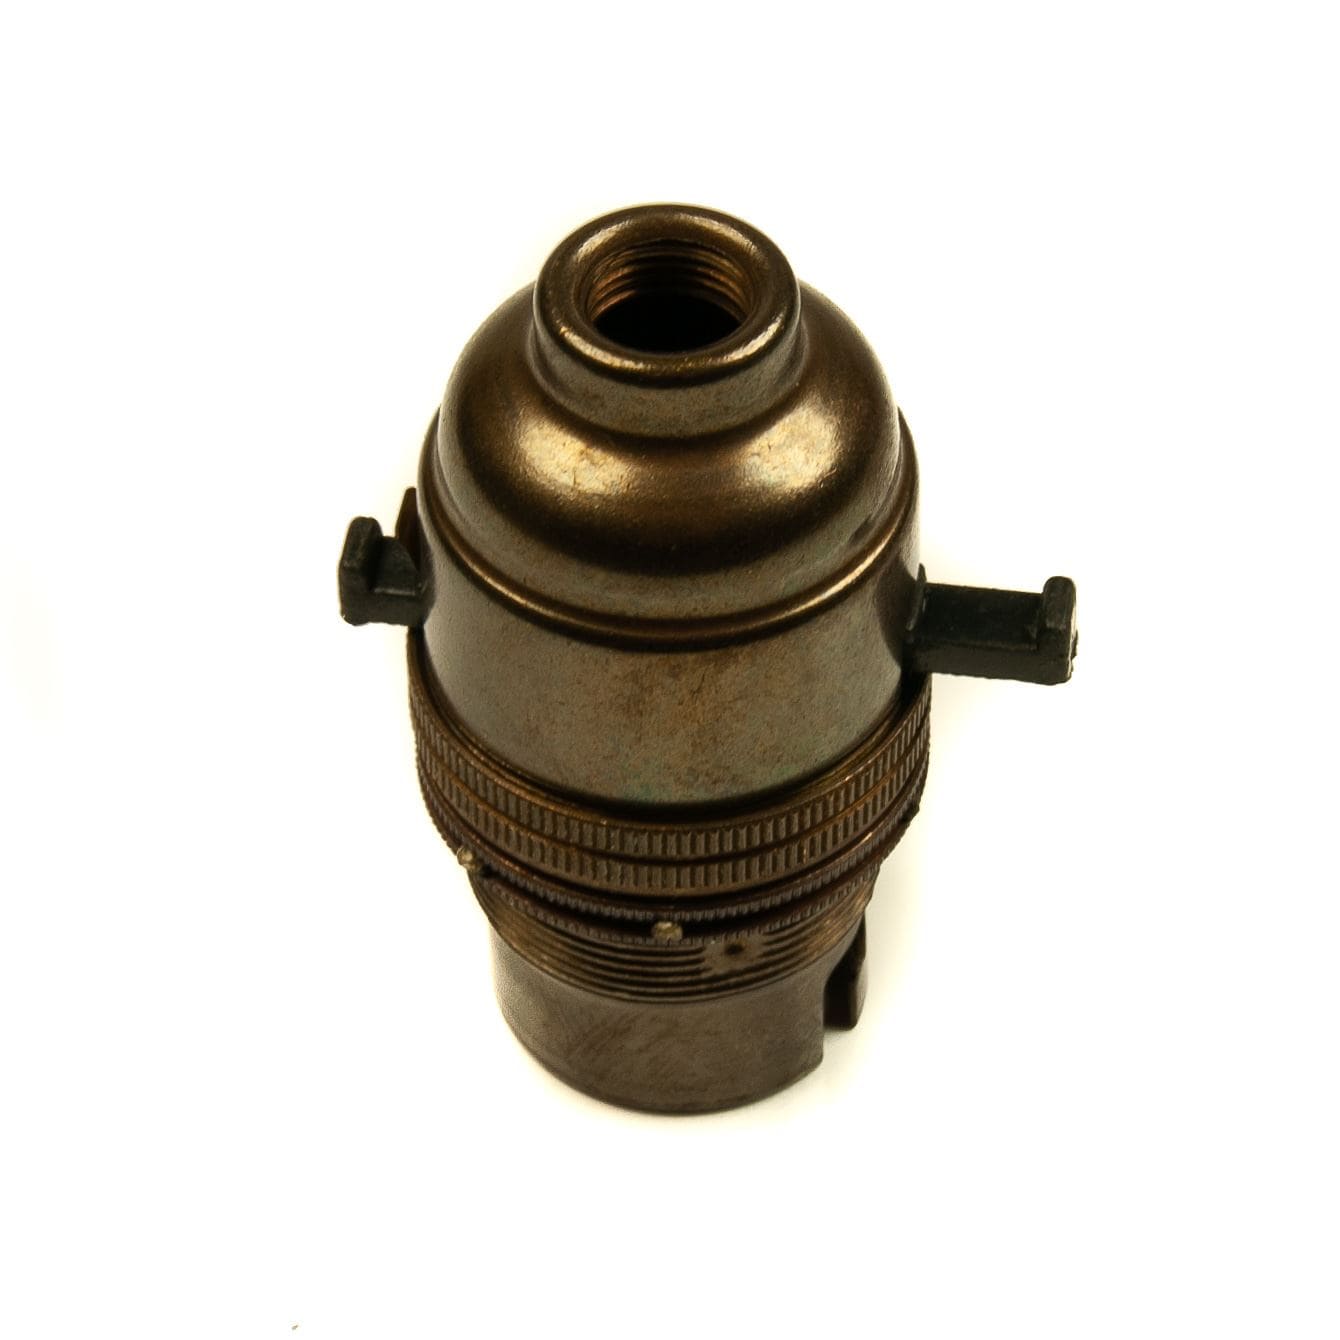 Switched Lamp Holder Old English Bayonet Cap (BC) (B22d) 10mm Screw Thread Switched Lampholders Thunderfix 100677